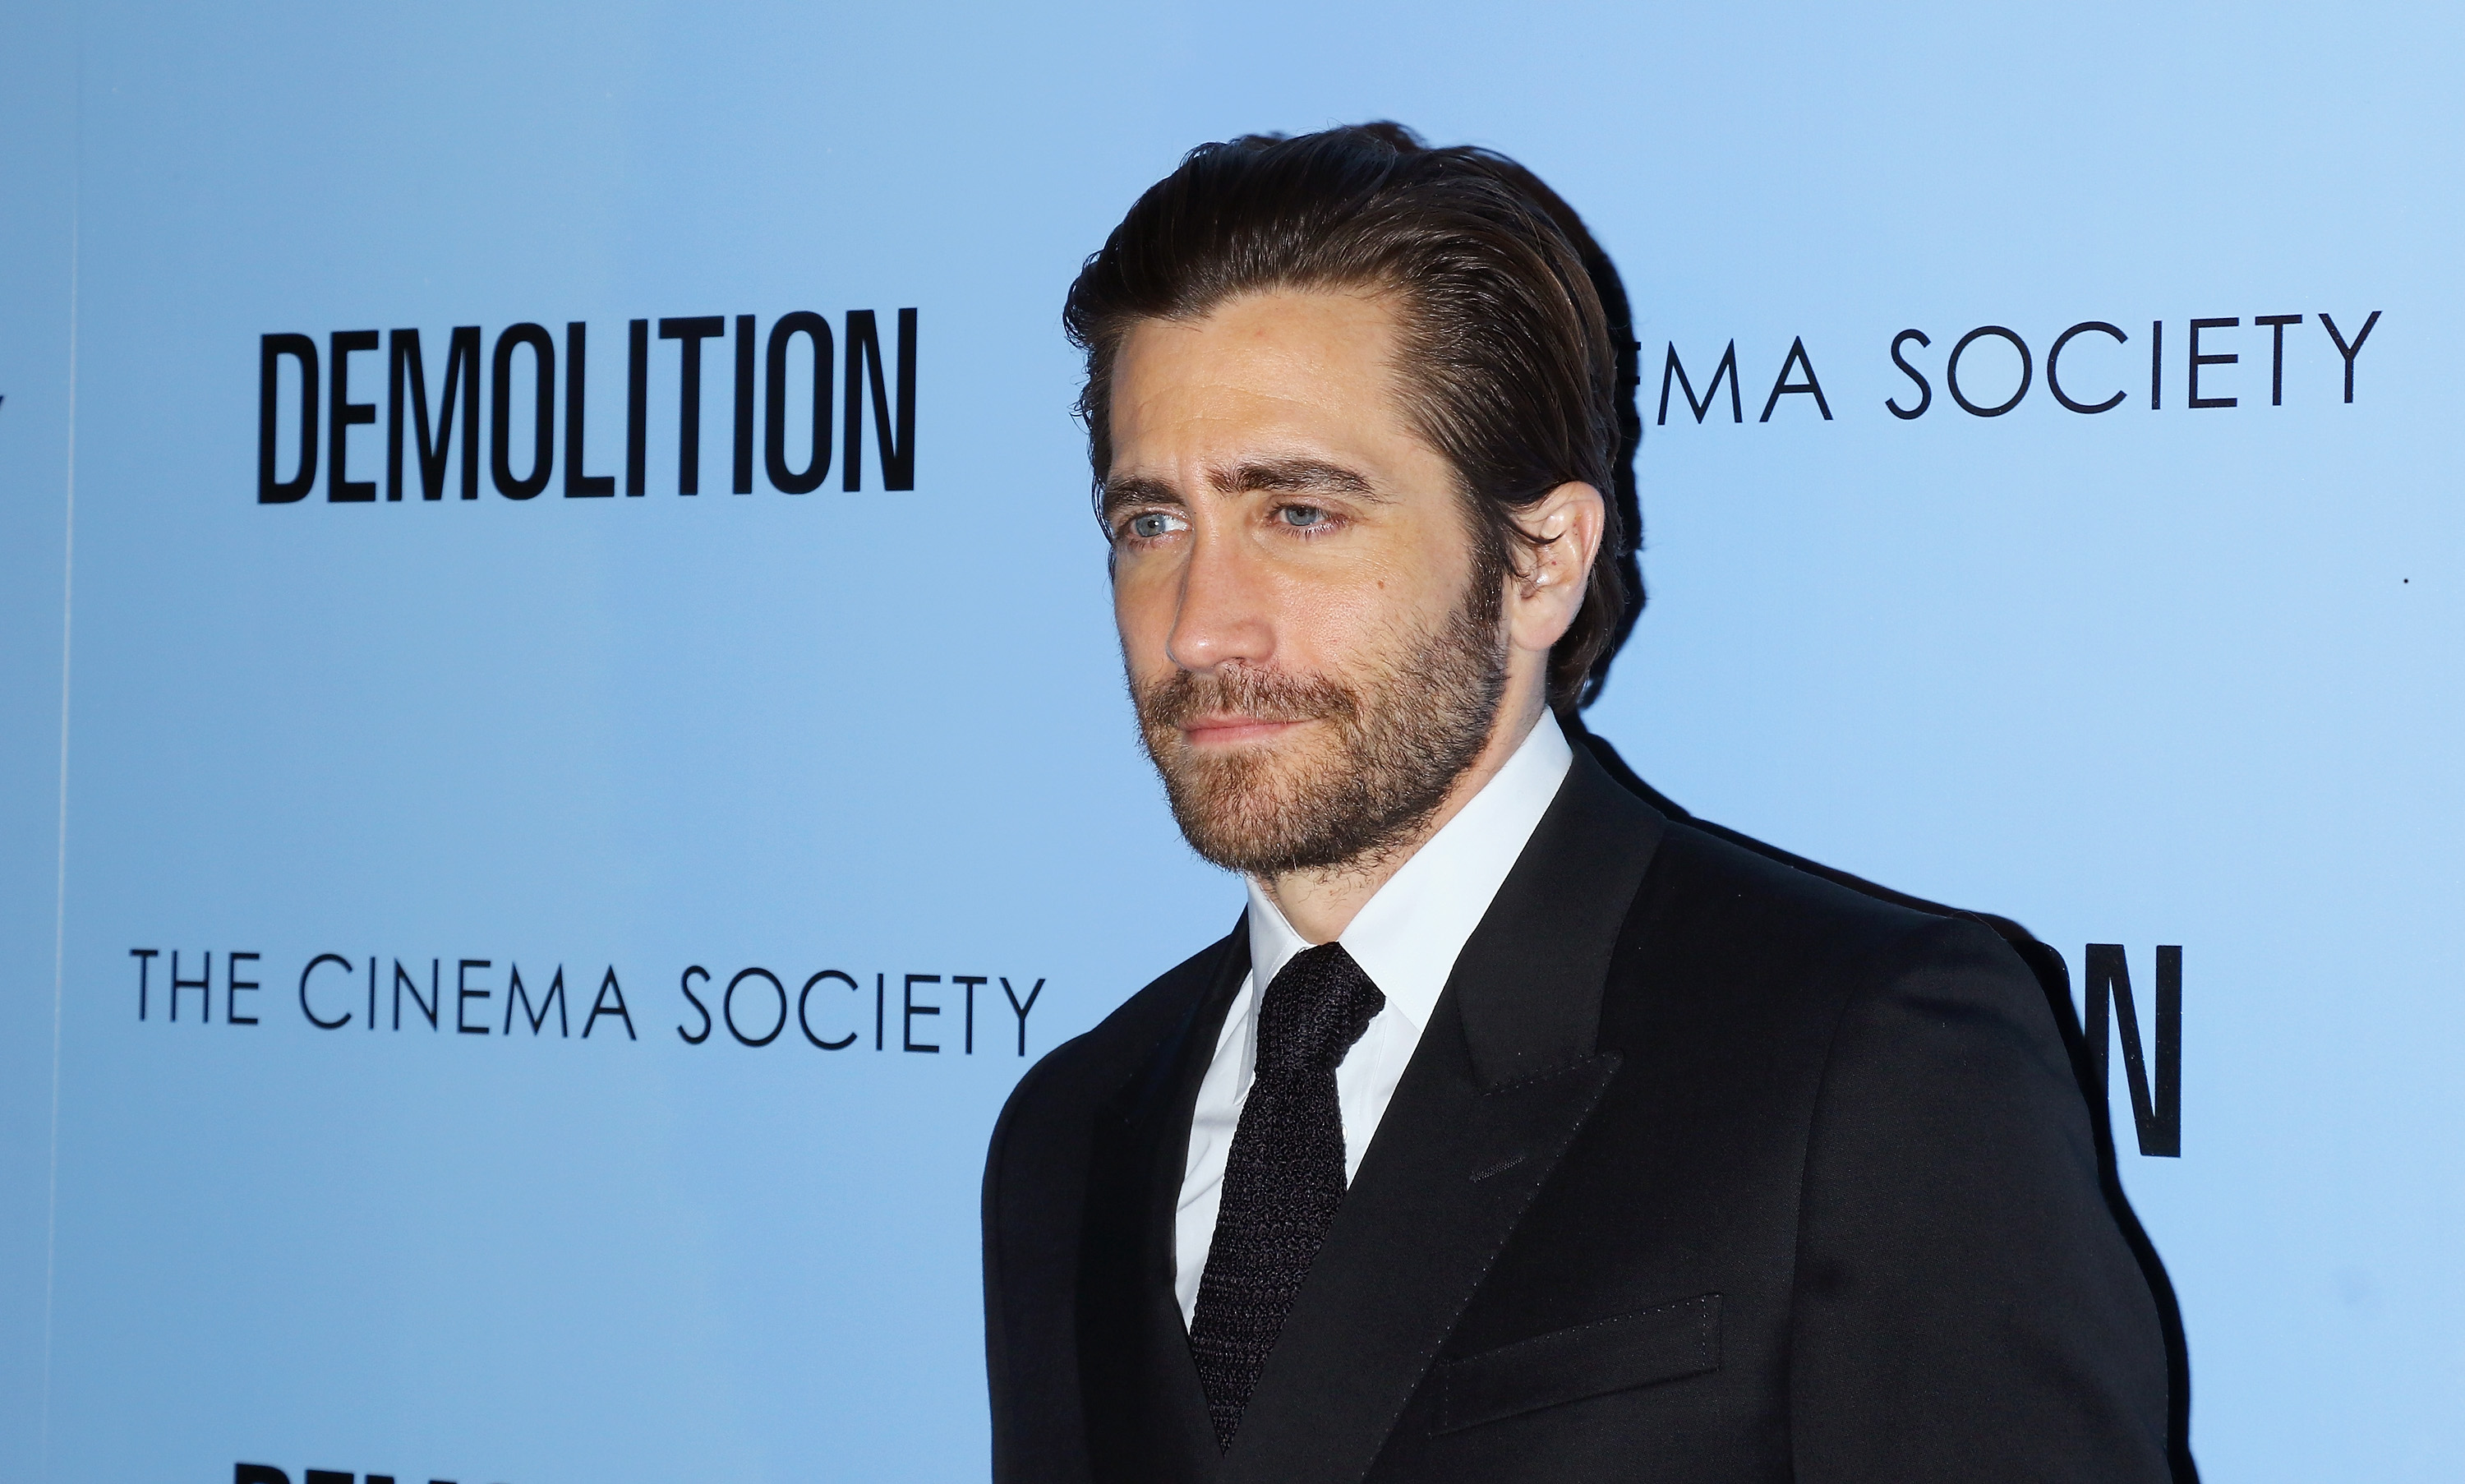 Actor Jake Gyllenhaal attends the Fox Searchlight Pictures with The Cinema Society host a screening of "Demolition" at the SVA Theater on March 21, 2016 in New York City. (Jim Spellman&mdash;WireImage/Getty Images)